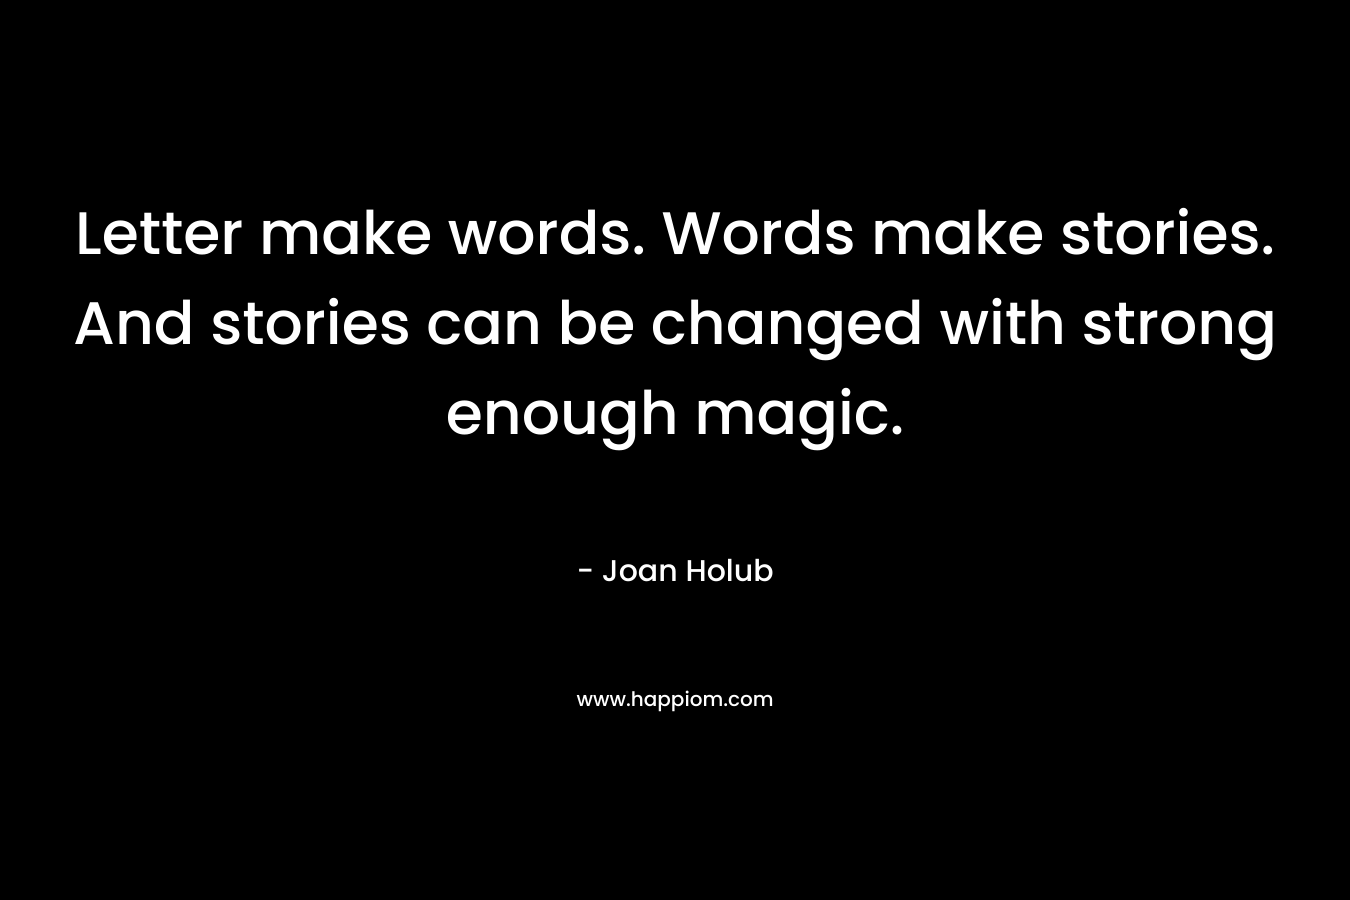 Letter make words. Words make stories. And stories can be changed with strong enough magic.